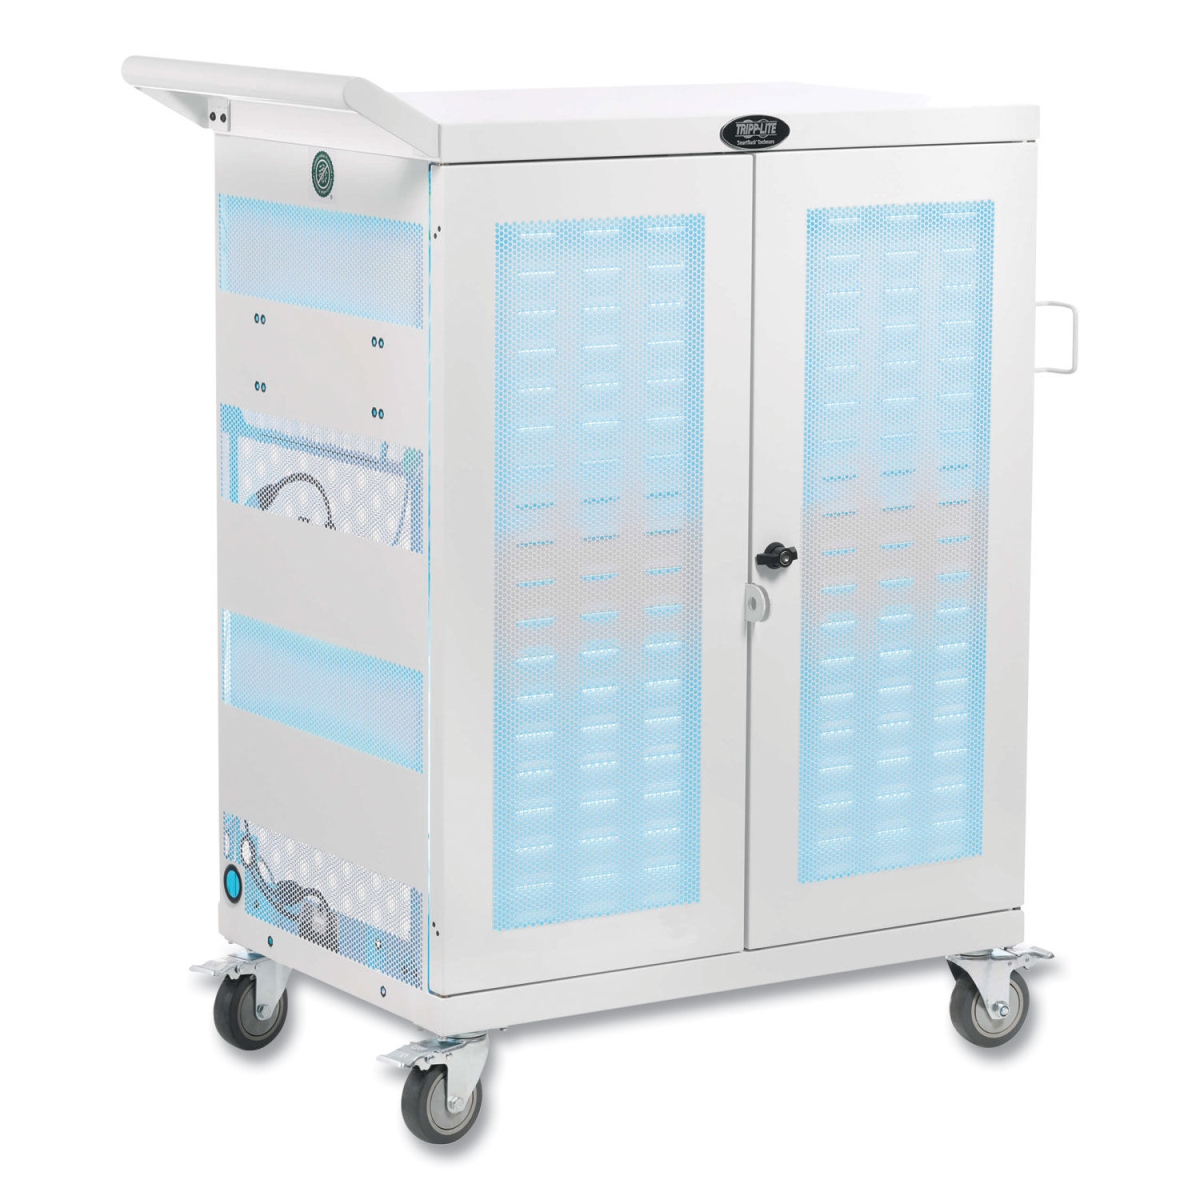 Picture of Tripplite CSC32ACWHG Medical Tablet UV Sterilization & Charging Cart